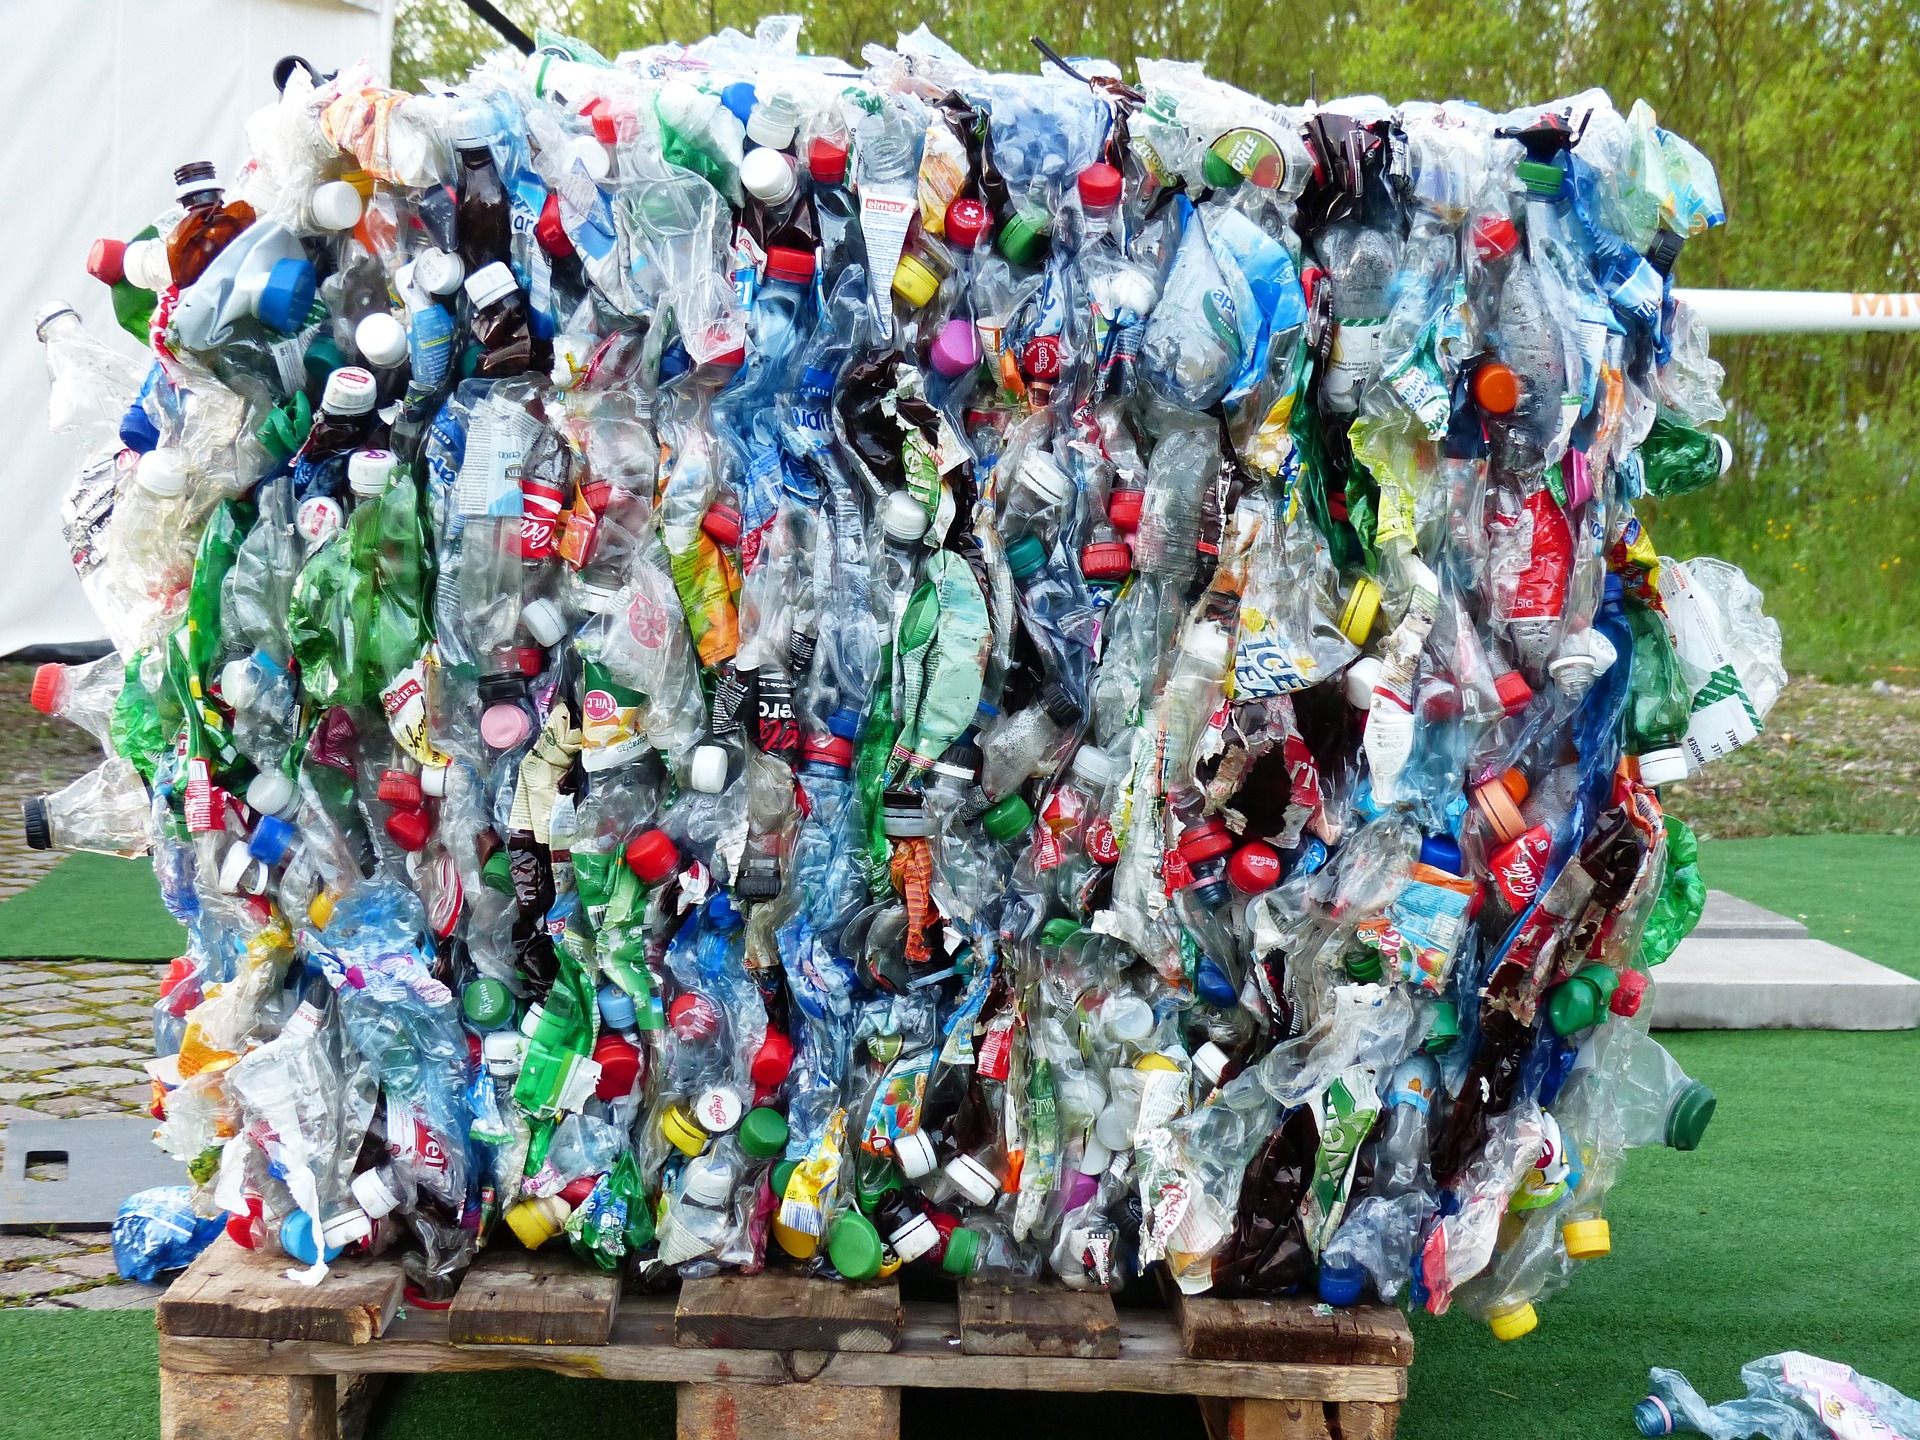 bale of plastic bottles for recycling.